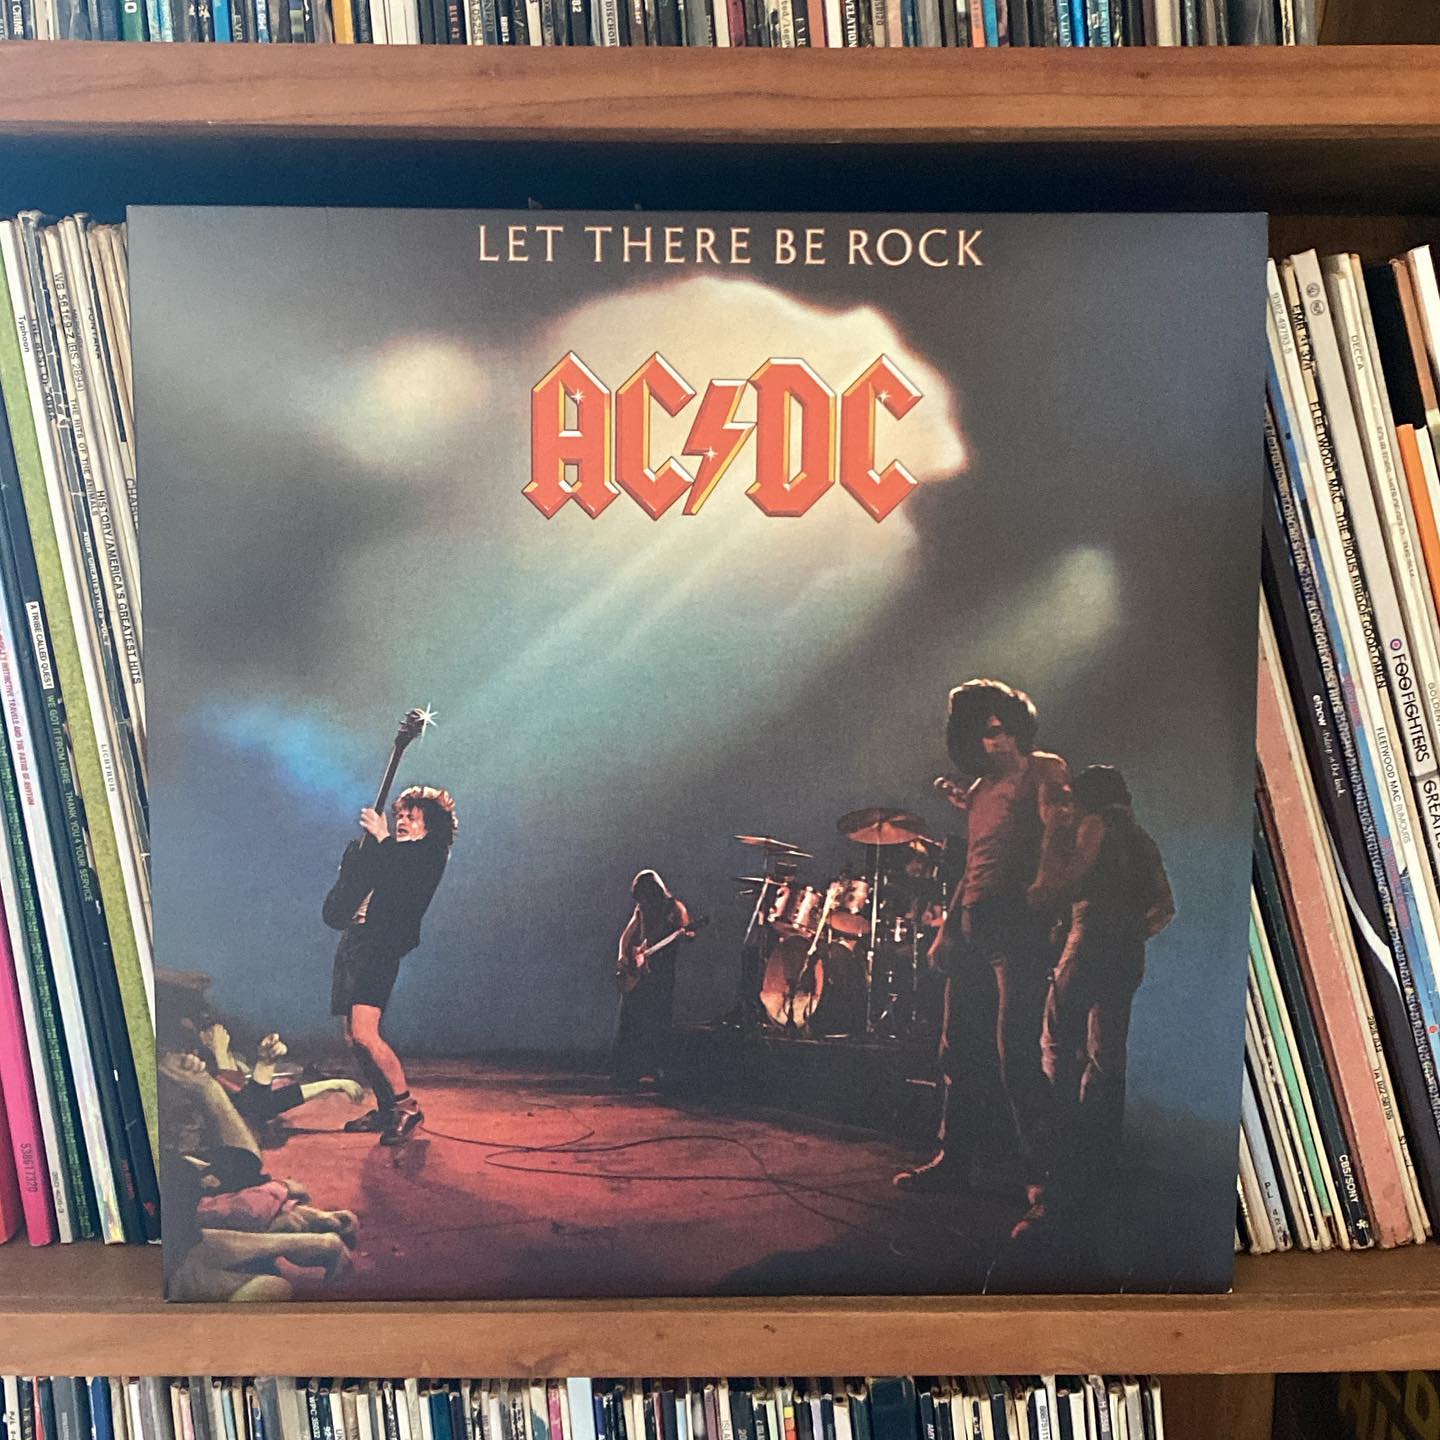 AC️DC - Let There Be Rock 🤘🏻 #vinylforbreakfast #vinyl #nowspinning #vinyleveryday @acdc